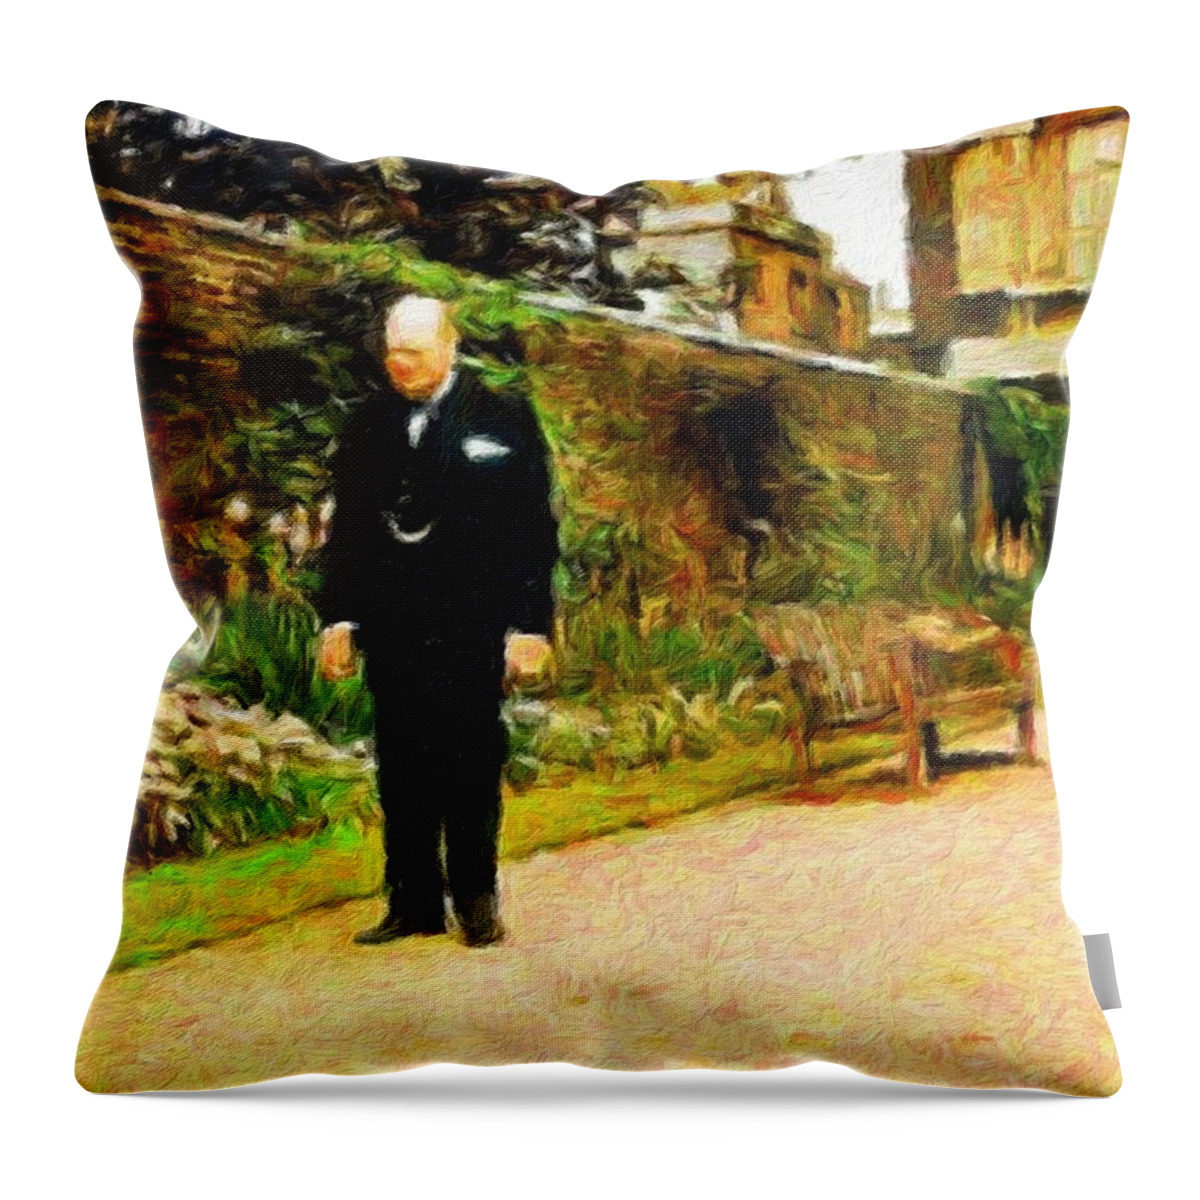 Winston Churchill Throw Pillow featuring the painting Winston Churchill, 1943 by Vincent Monozlay